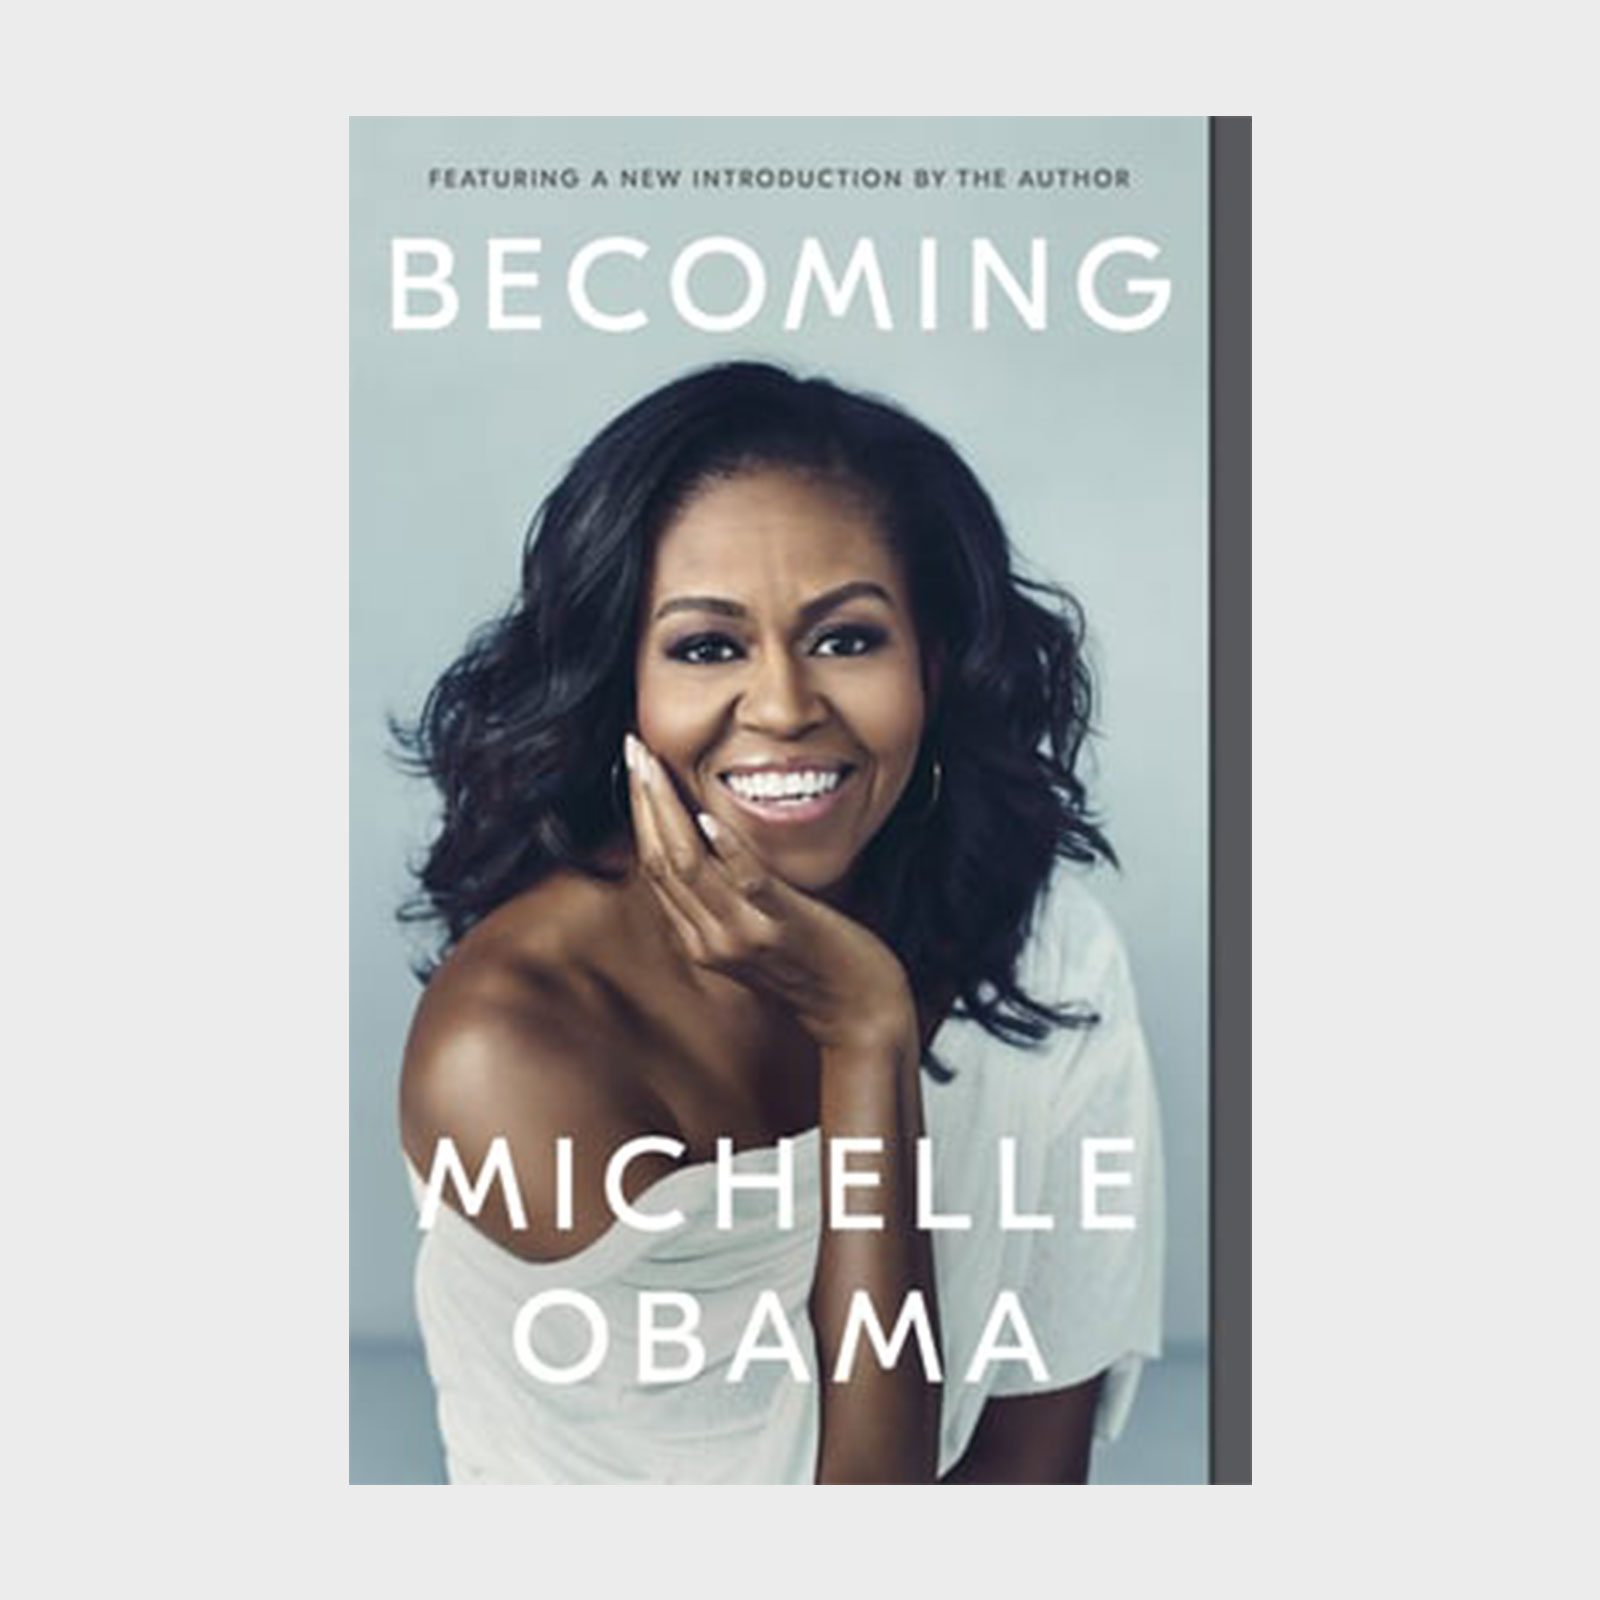 <p>Released in 2018, <a href="https://bookshop.org/p/books/becoming-michelle-obama/266233?ean=9781524763145" rel="noopener"><em>Becoming</em></a> is an intimate, motivational memoir written by first lady Michelle Obama, who recounts her time growing up in Chicago, her career as an attorney, balancing motherhood in the spotlight, advocating for women, becoming the first African American to hold the role of first lady of the United States and so much more. She's since adapted the bestselling book for young readers, has launched a <em>Becoming</em>-themed <a href="https://www.rd.com/list/gratitude-journal/" rel="noopener noreferrer">gratitude journal</a> and has recently released a follow-up memoir called <a href="https://www.rd.com/article/michelle-obama-the-light-we-carry/" rel="noopener noreferrer"><em>The Light We Carry</em></a>.</p> <p class="listicle-page__cta-button-shop"><a class="shop-btn" href="https://bookshop.org/p/books/becoming-michelle-obama/266233?ean=9781524763145">Shop Now</a></p>